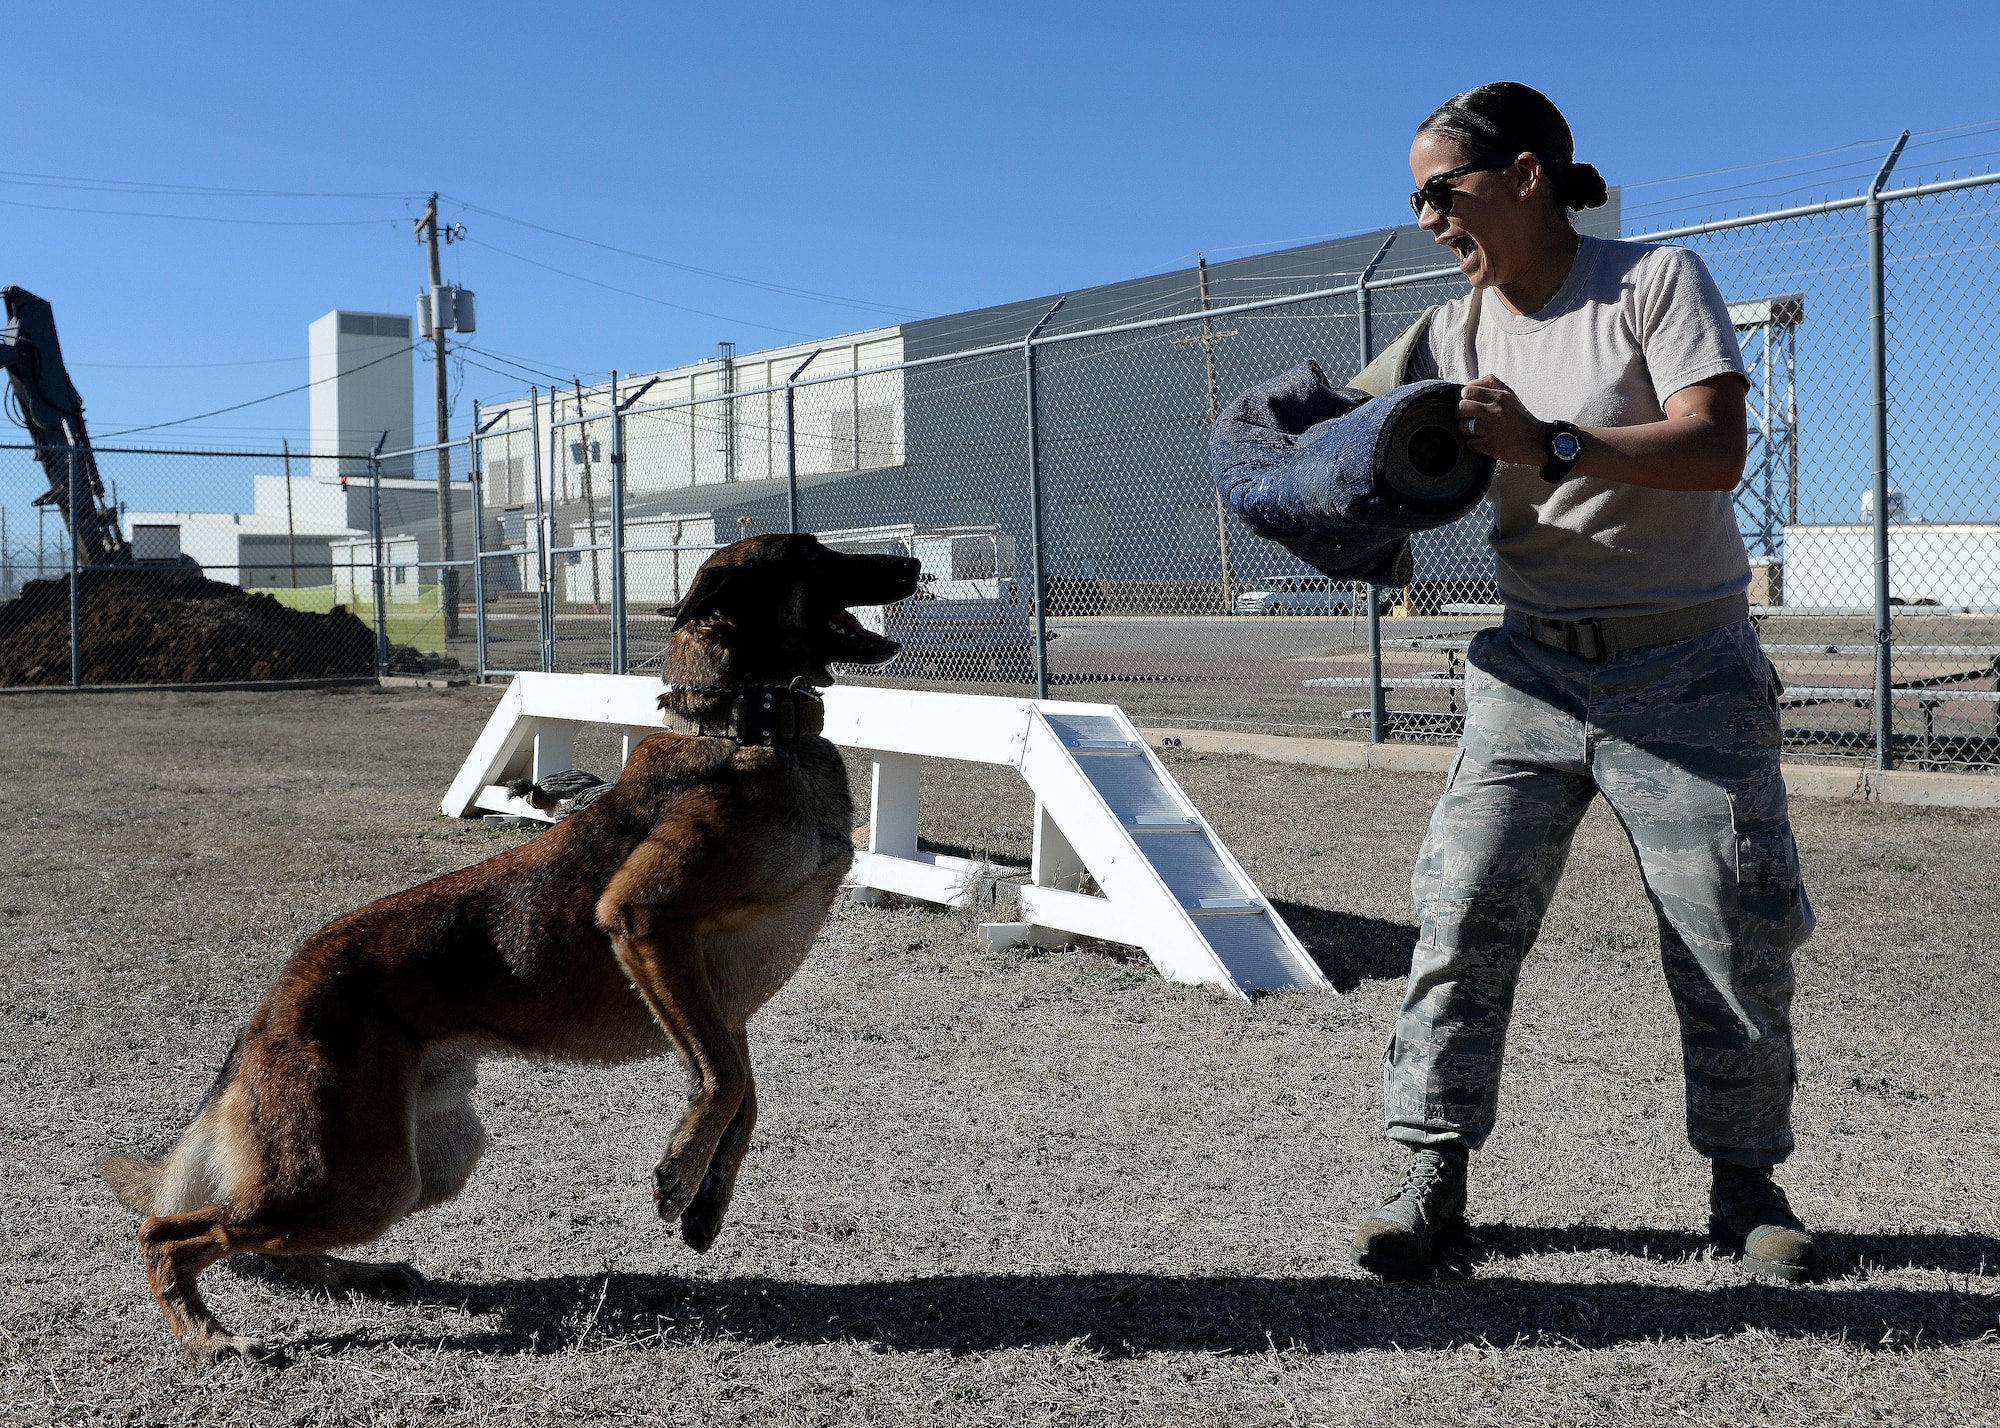 Yyoda, a U.S. Air Force military working dog, lunges at U.S. Air Force Senior Airman Laci Mendez, 97th Security Forces Squadron working dog handler, after being provoked through aggressive body posturing and verbal cues during training at Altus Air Force Base, Oklahoma, Feb. 10, 2015. Military working dogs are trained to attack through the use of verbal commands, but also of their own accord when they perceive a threat. (U.S. Air Force photo by Airman 1st Class Megan E. Acs)